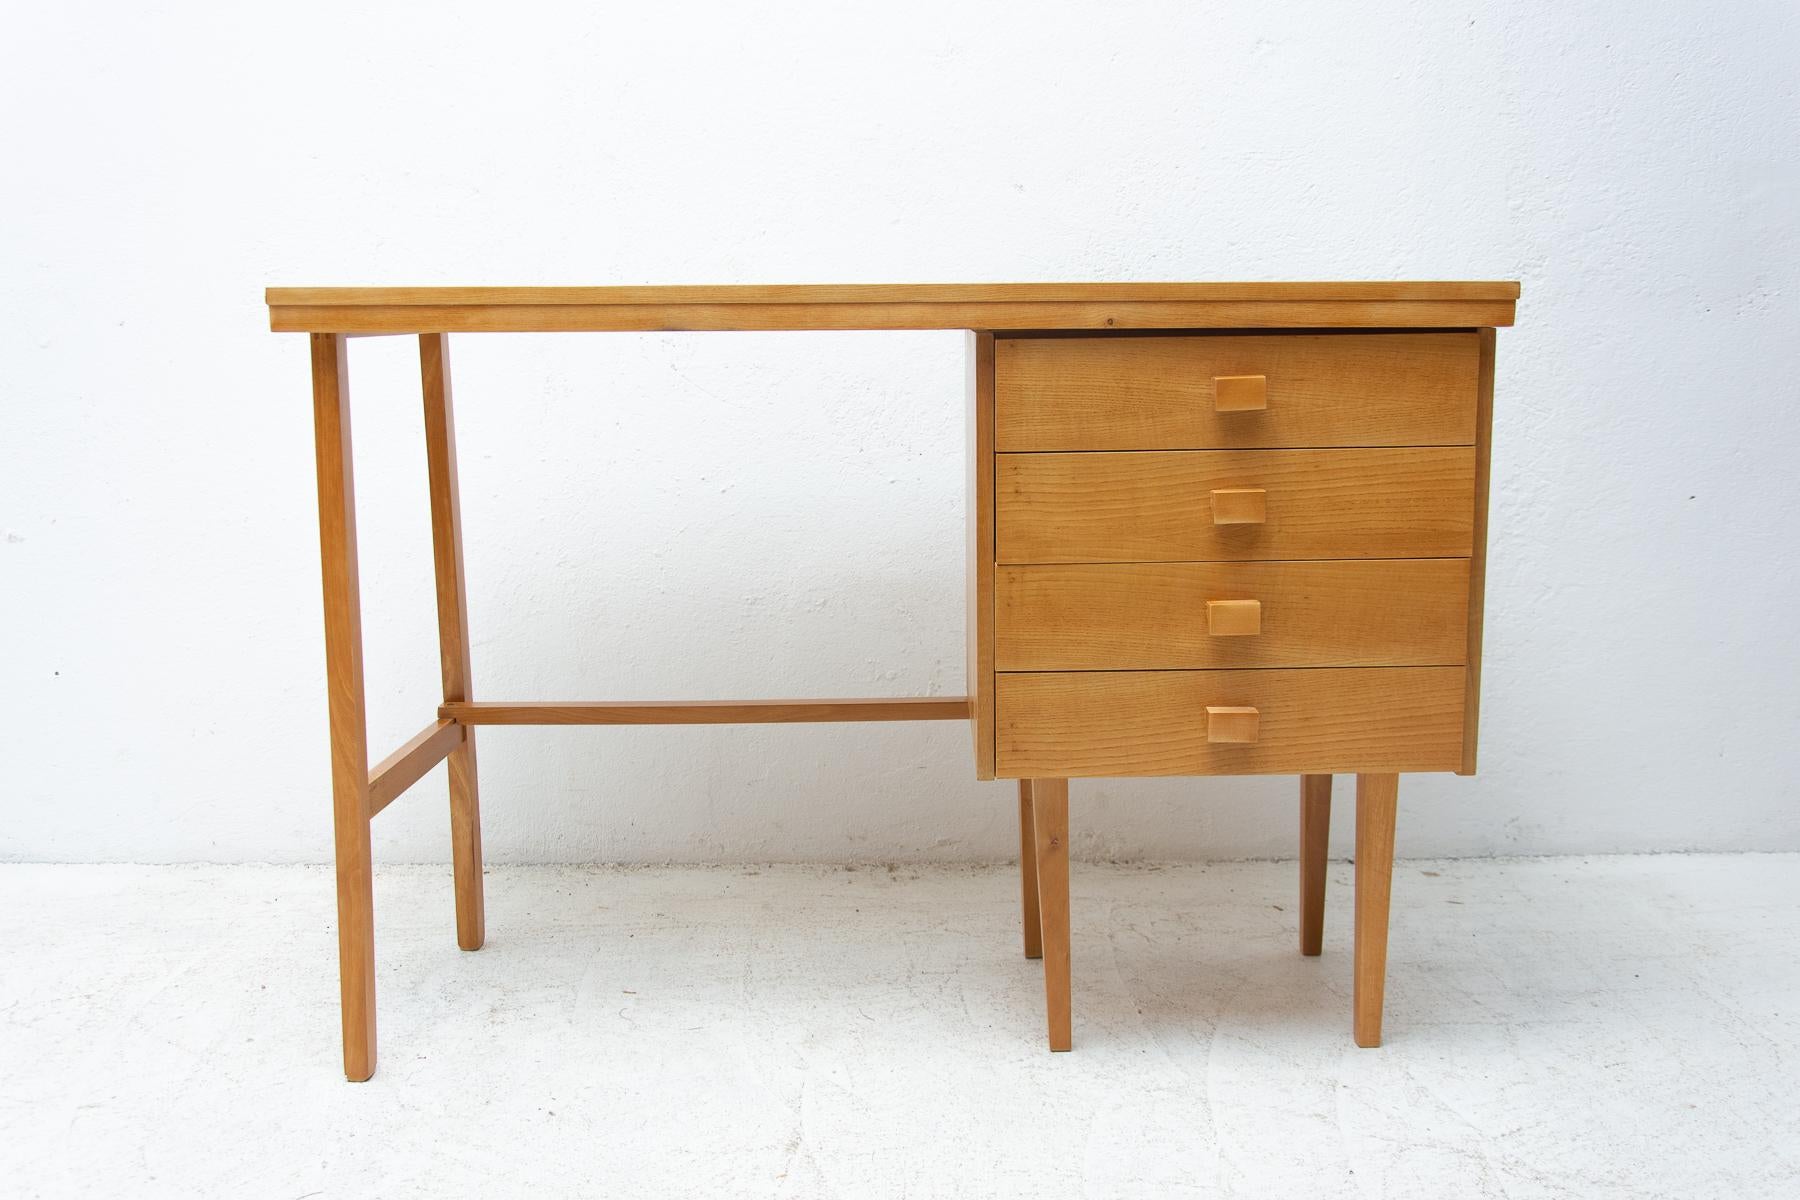 A Simple ladies beech wood writing desk from the Nový Domov company, 1960´s, Czechoslovakia
This desk was manufactured by Nový Domov Company and its design we attributed to František Jirák, because most likely this table was a part of classic and